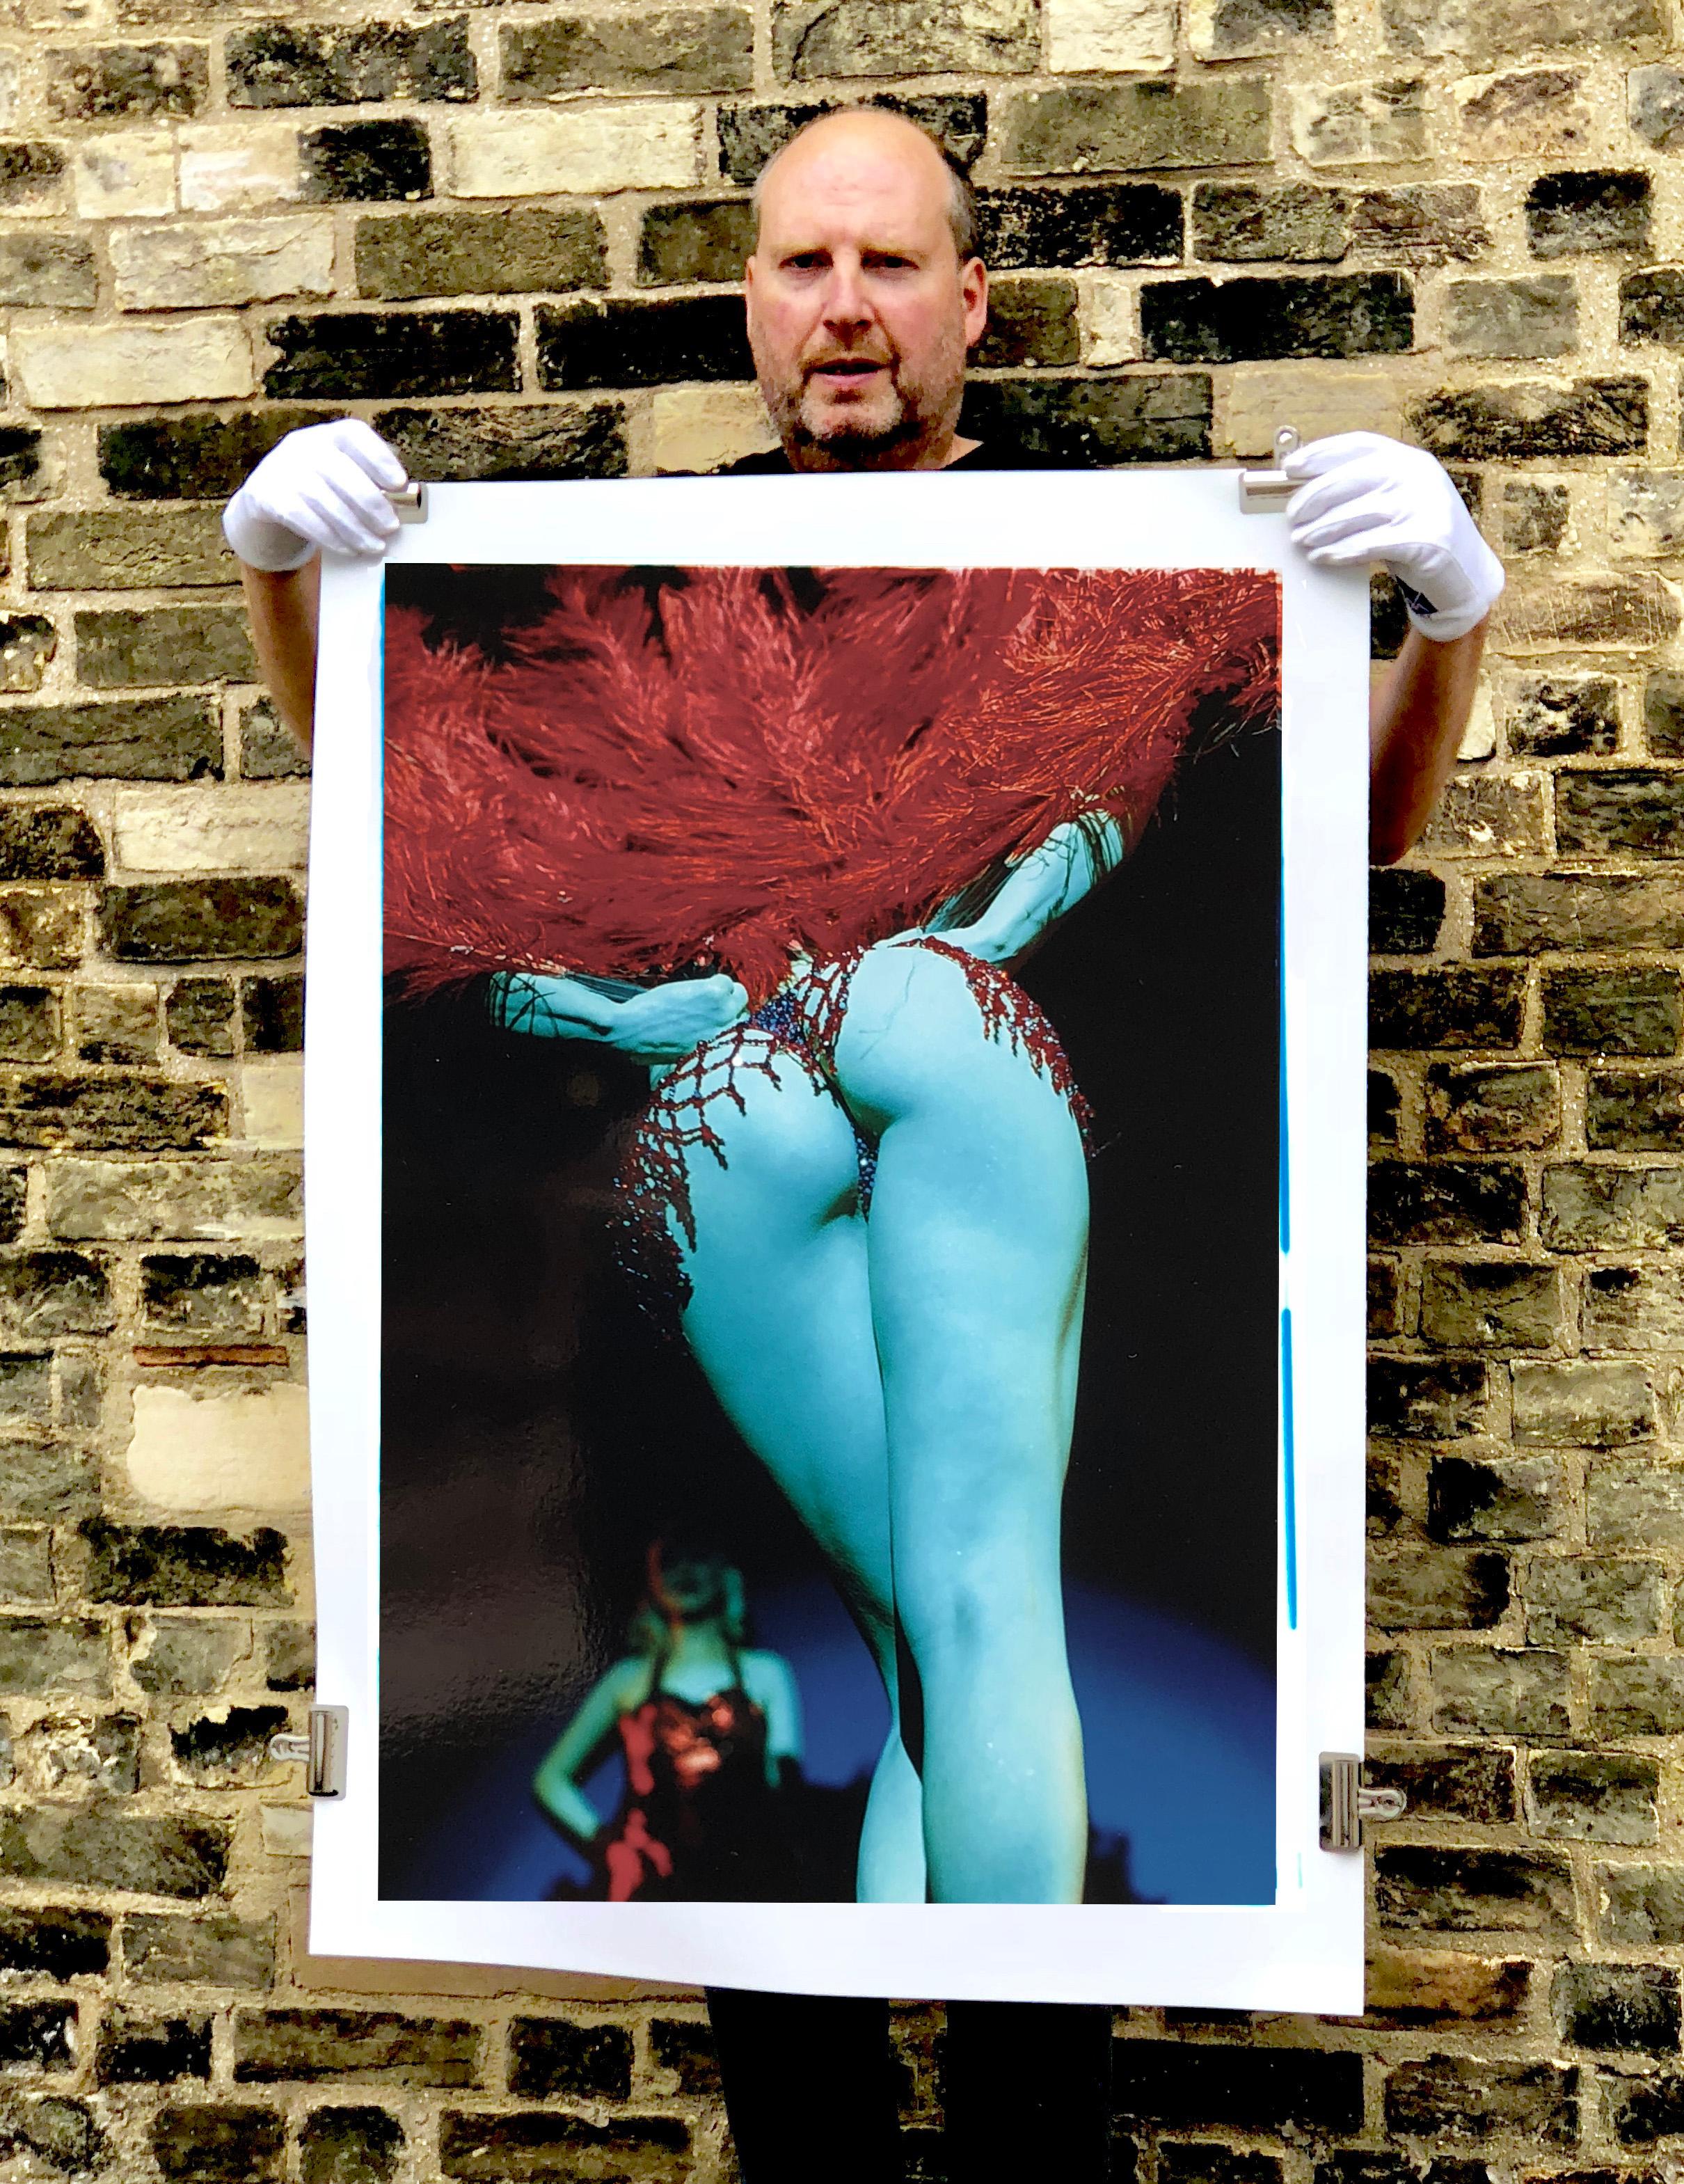 Richard Heeps became well-known for his Burlesque Photography after he spent 2003 capturing performances in Britain & America. He spent a lot on time with his subjects on a number of occasions, building close relationships with them resulting in